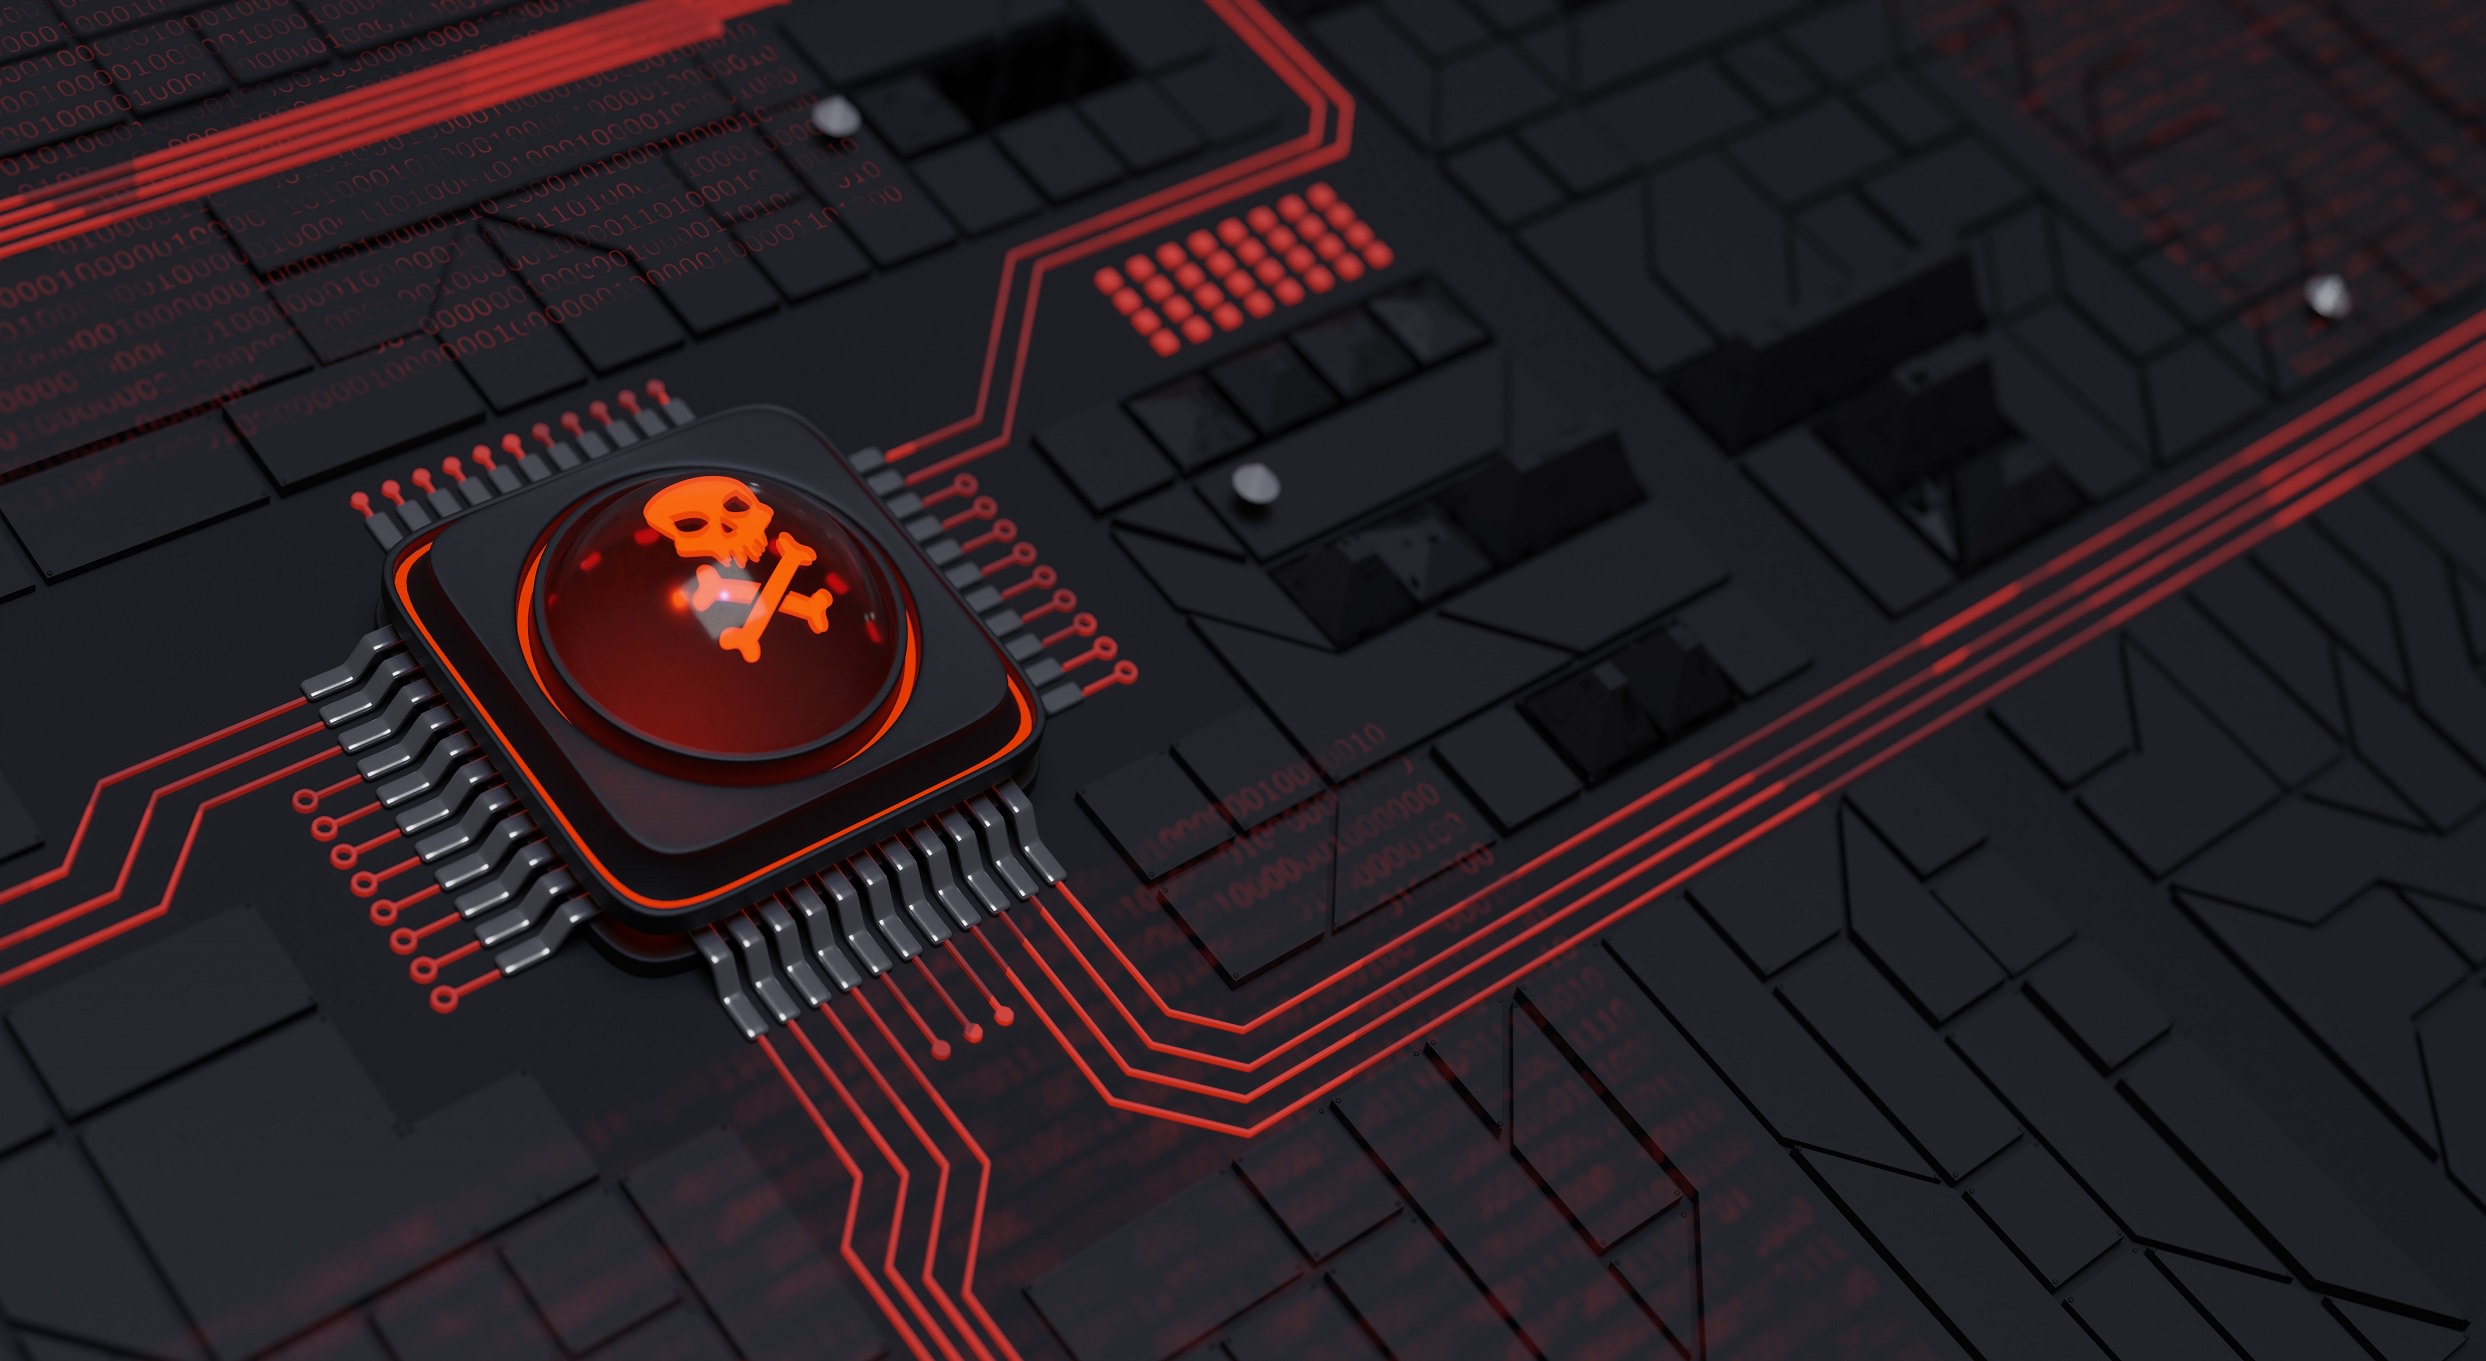 Online hacking or piracy background. 3d illustration